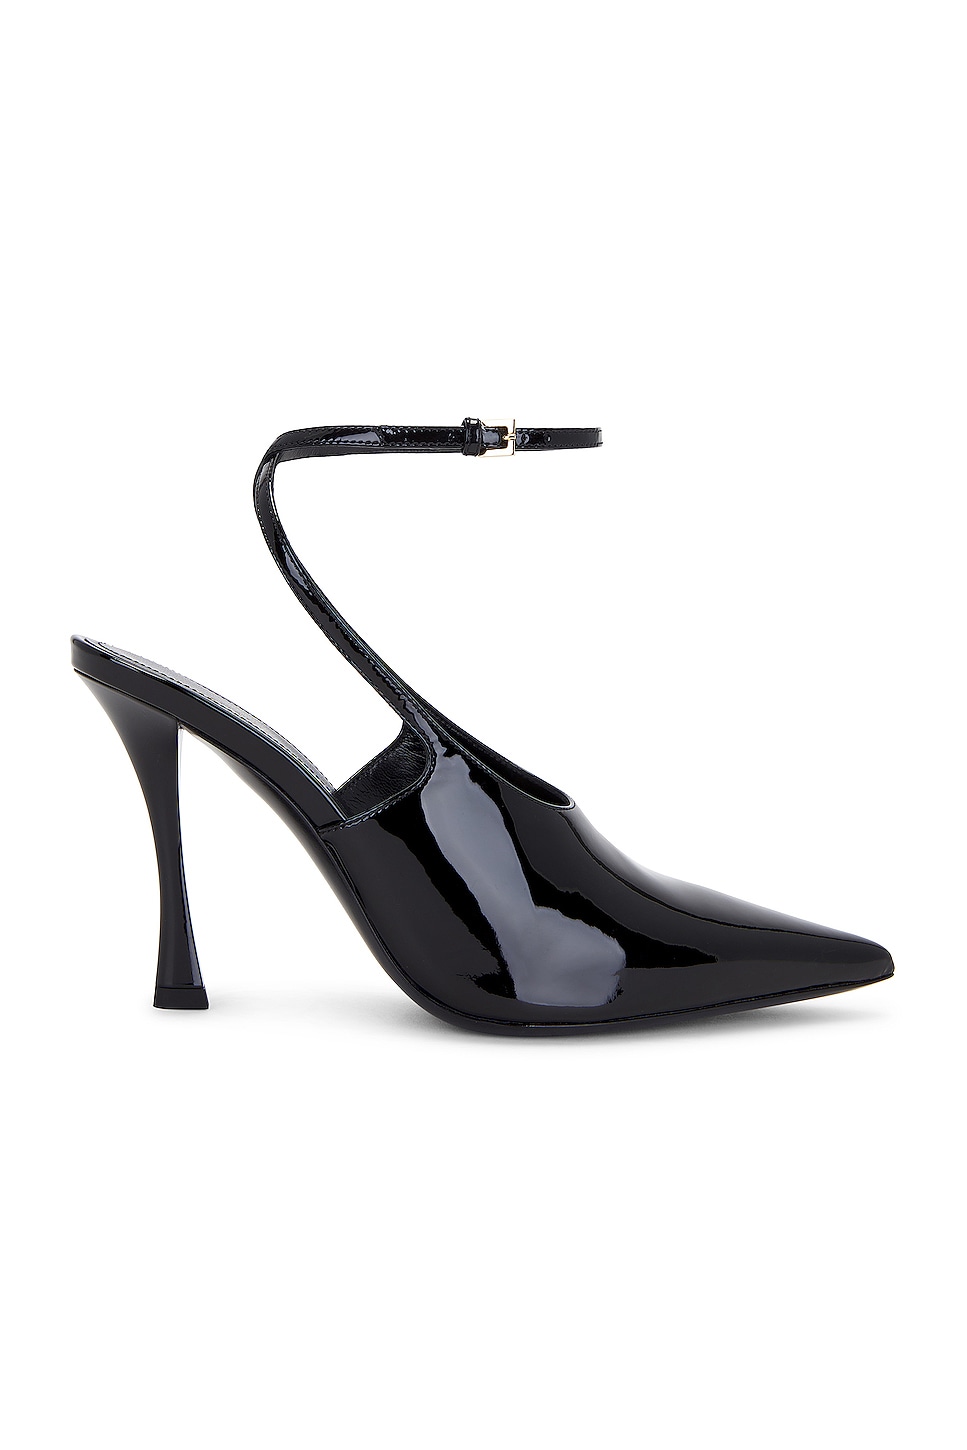 Image 1 of Givenchy Show Slingback Pump in Black